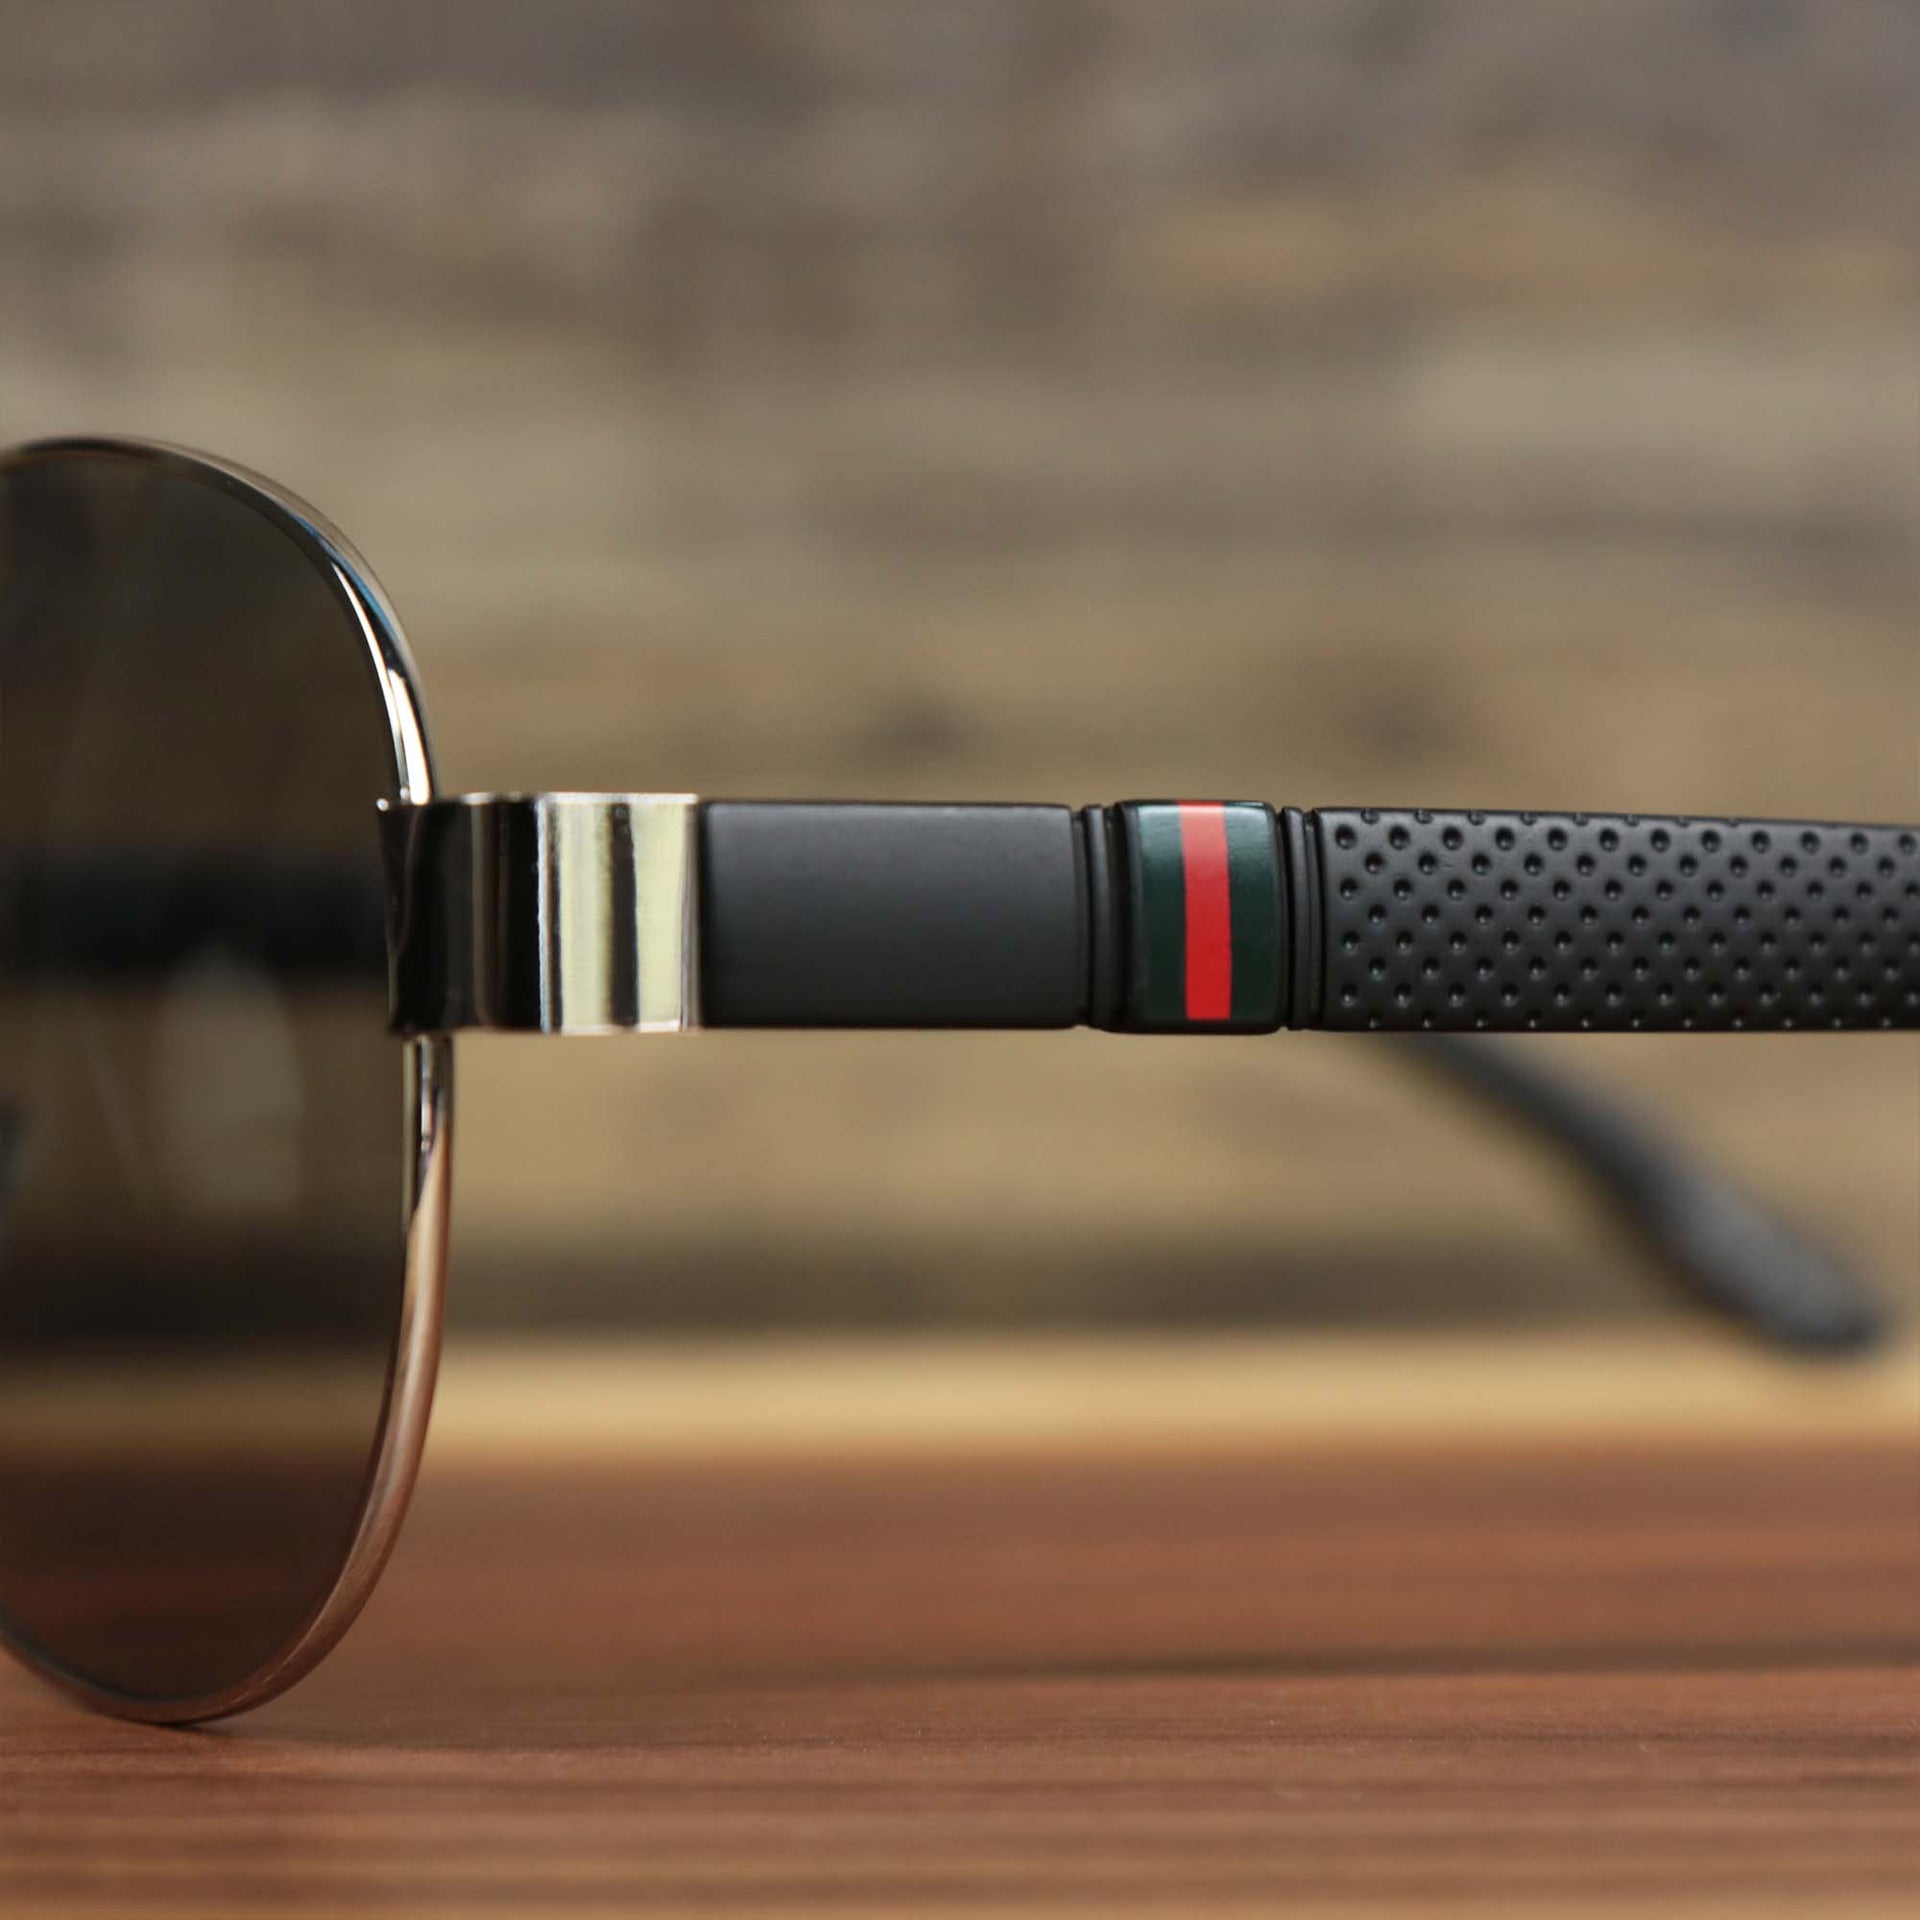 The racing stripe on the Aviator Frame Racing Stripes Black Lens Sunglasses with Silver Frame